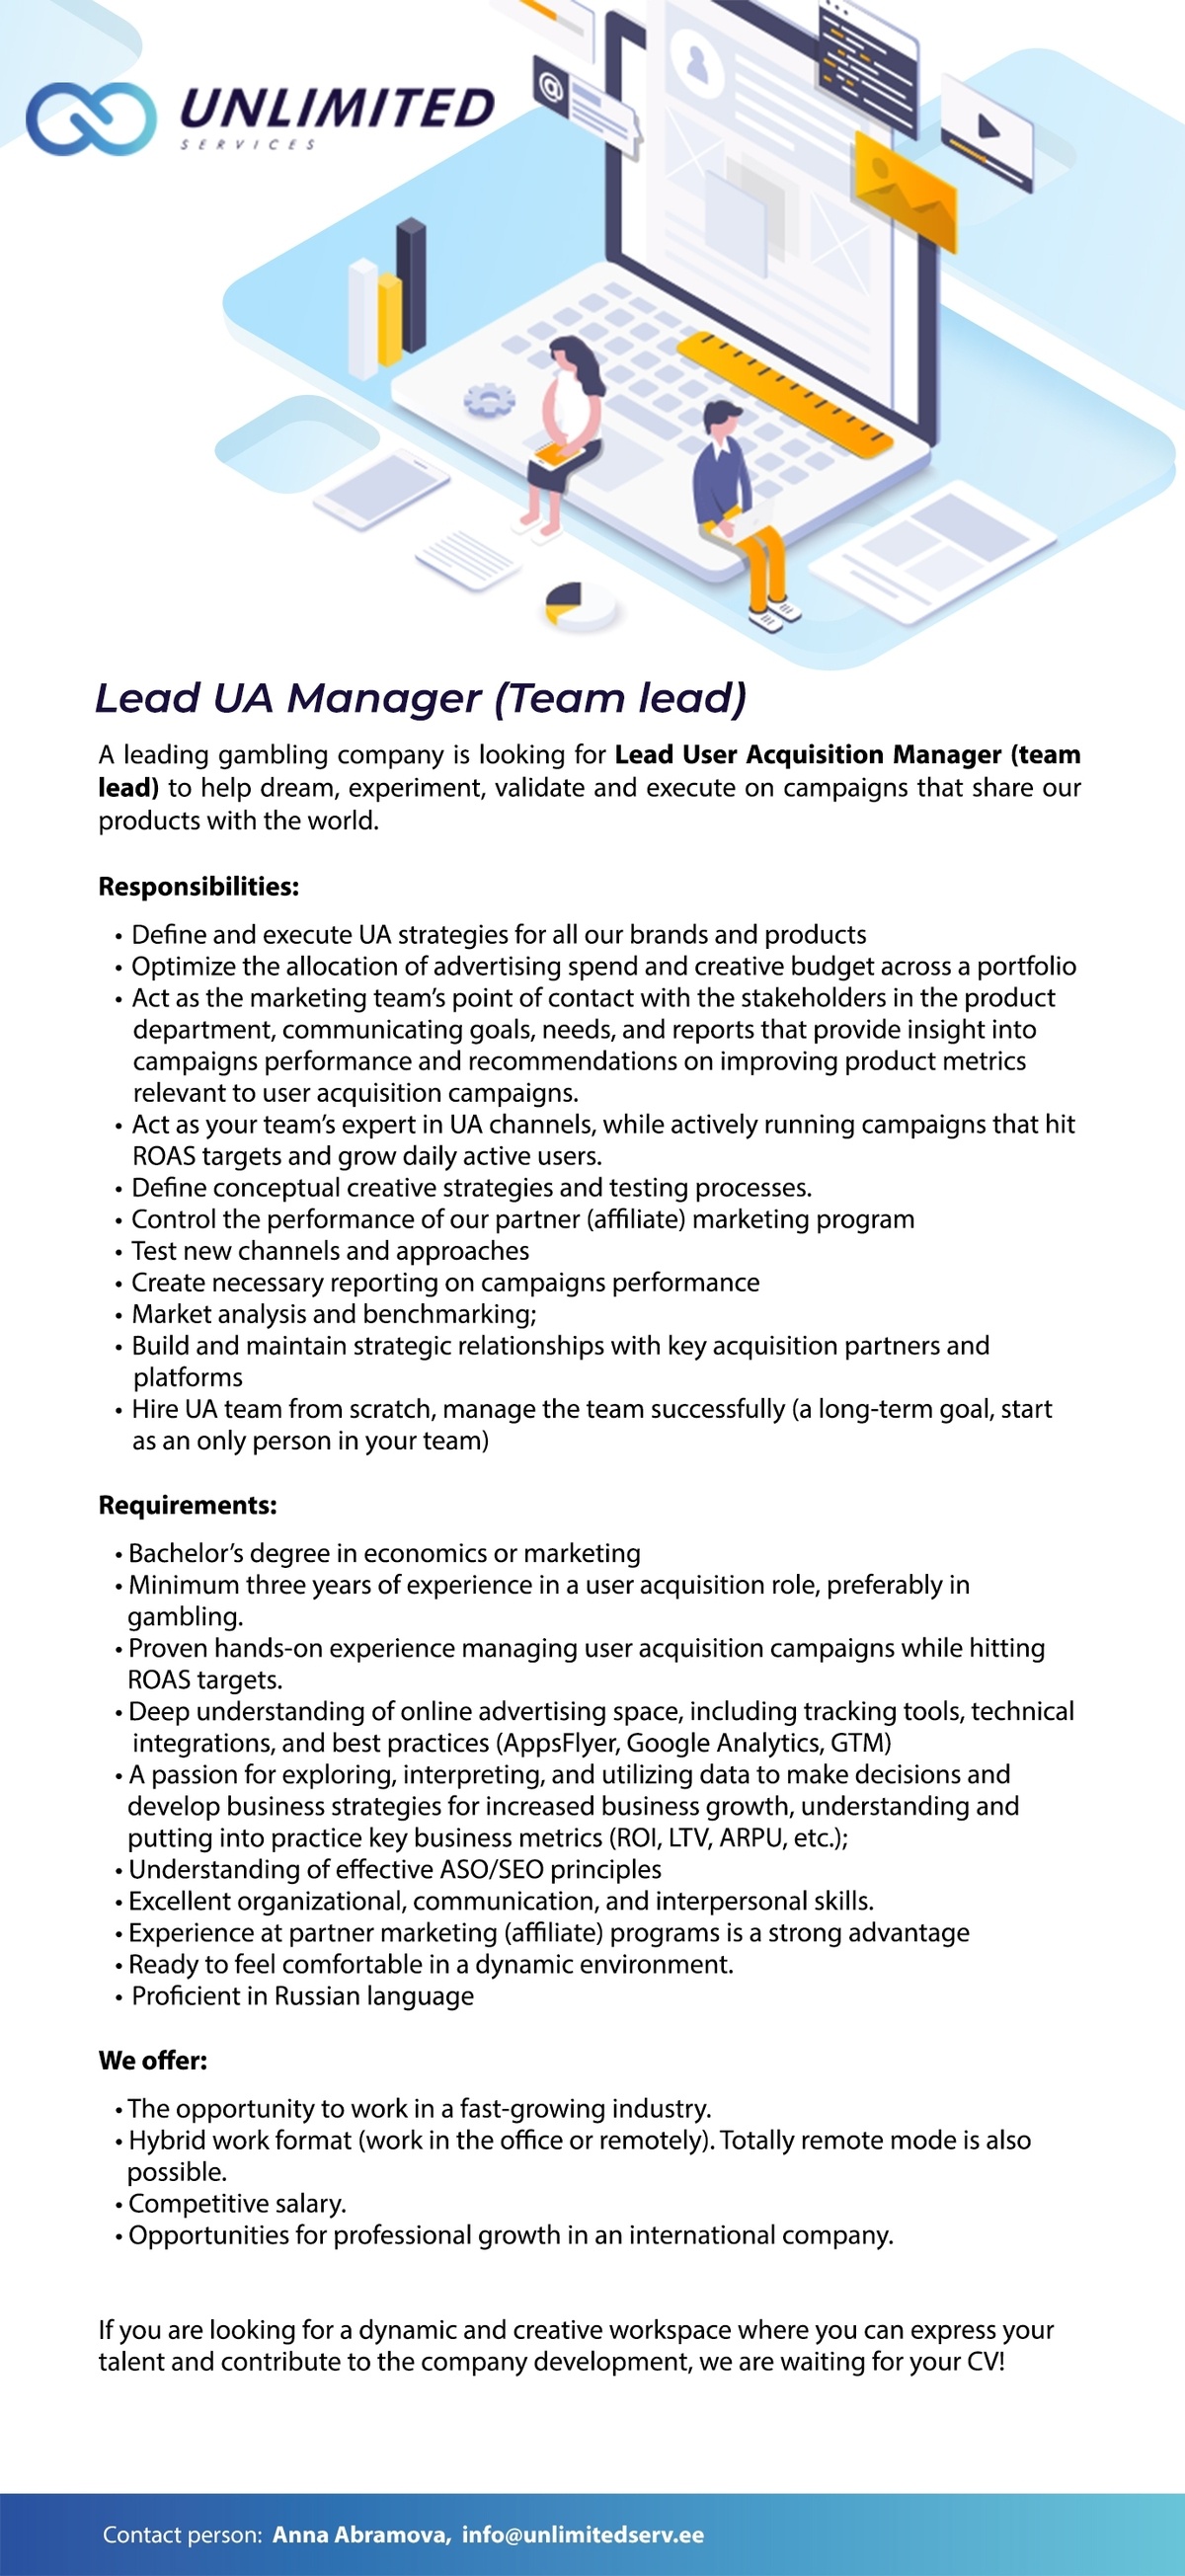 Unlimited Services OÜ Lead UA Manager (Team lead)